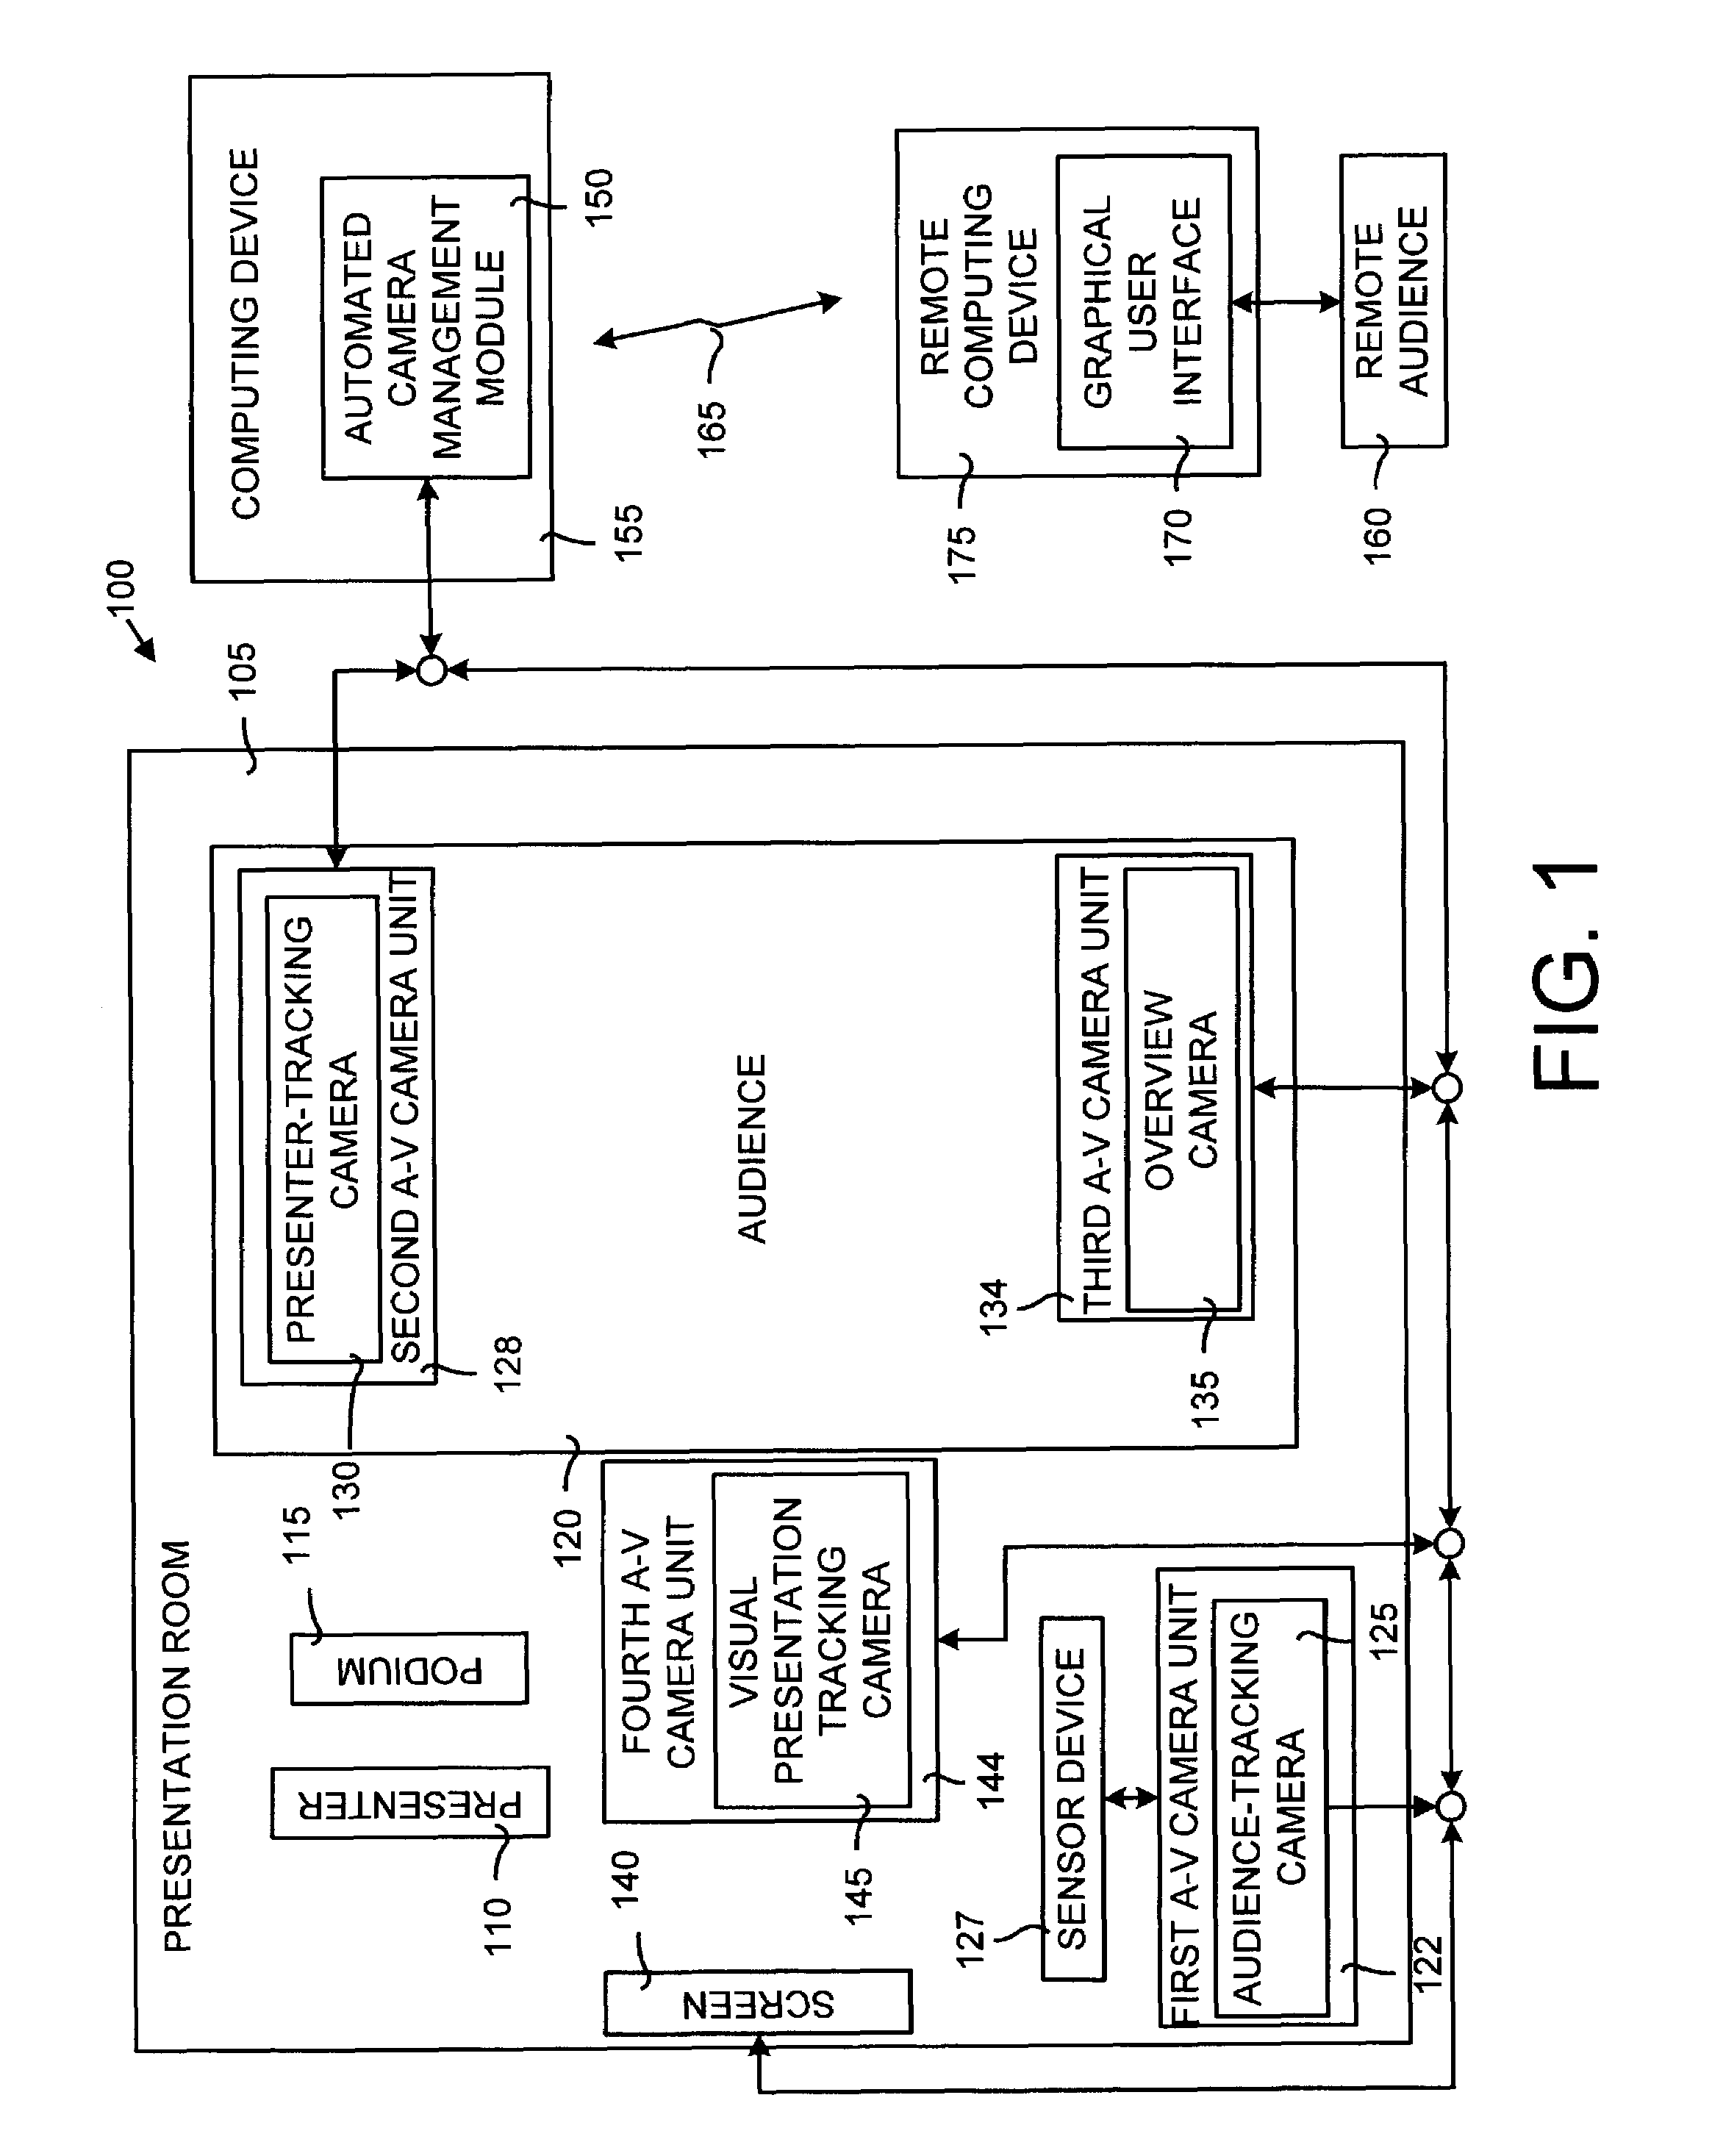 Automated camera management system and method for capturing presentations using videography rules